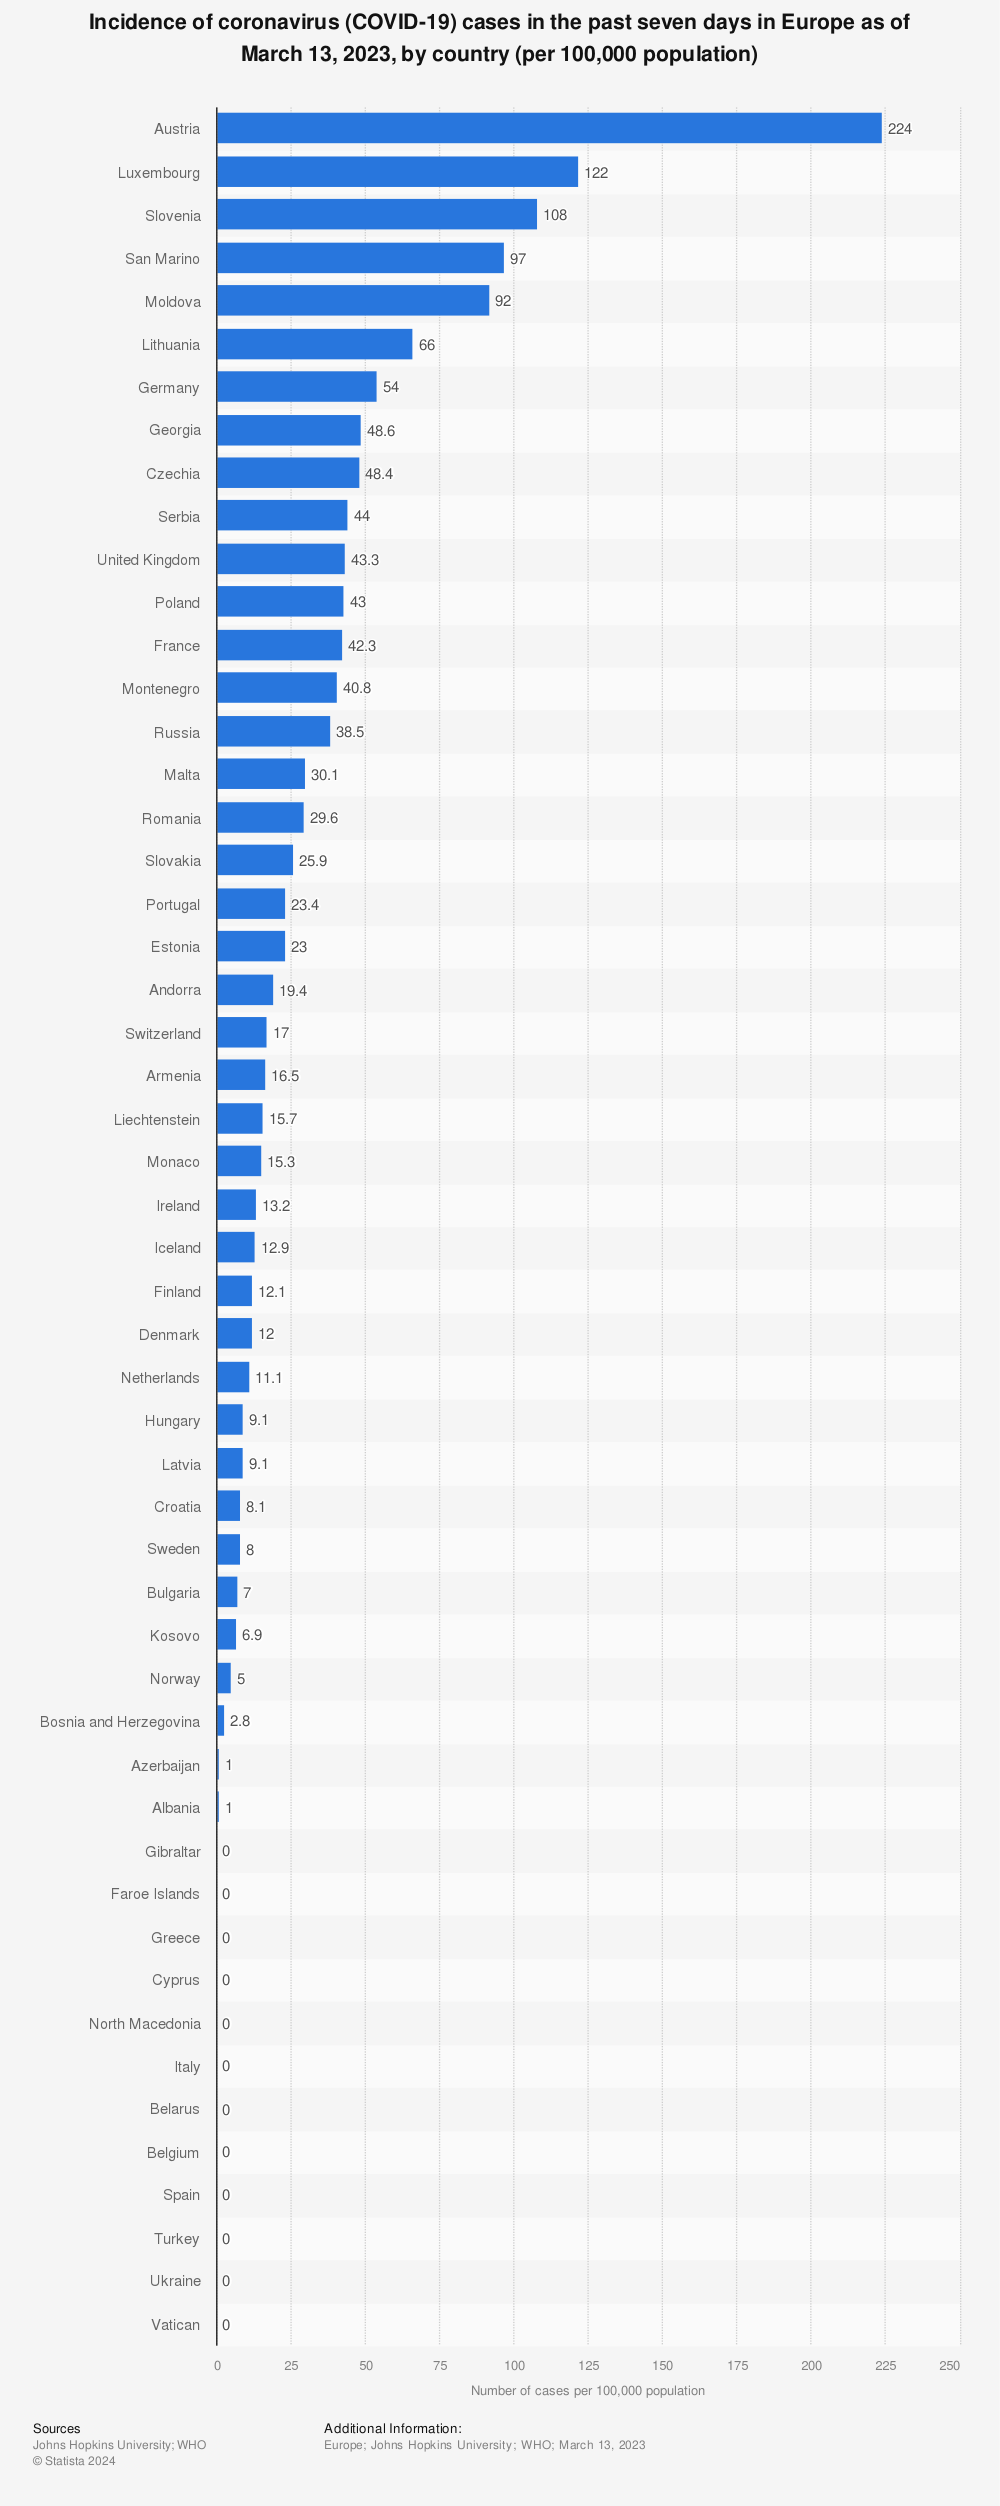 Statistic: Incidence of coronavirus (COVID-19) cases in the past seven days in Europe as of November 29, 2021, by country (per 100,000 population) | Statista